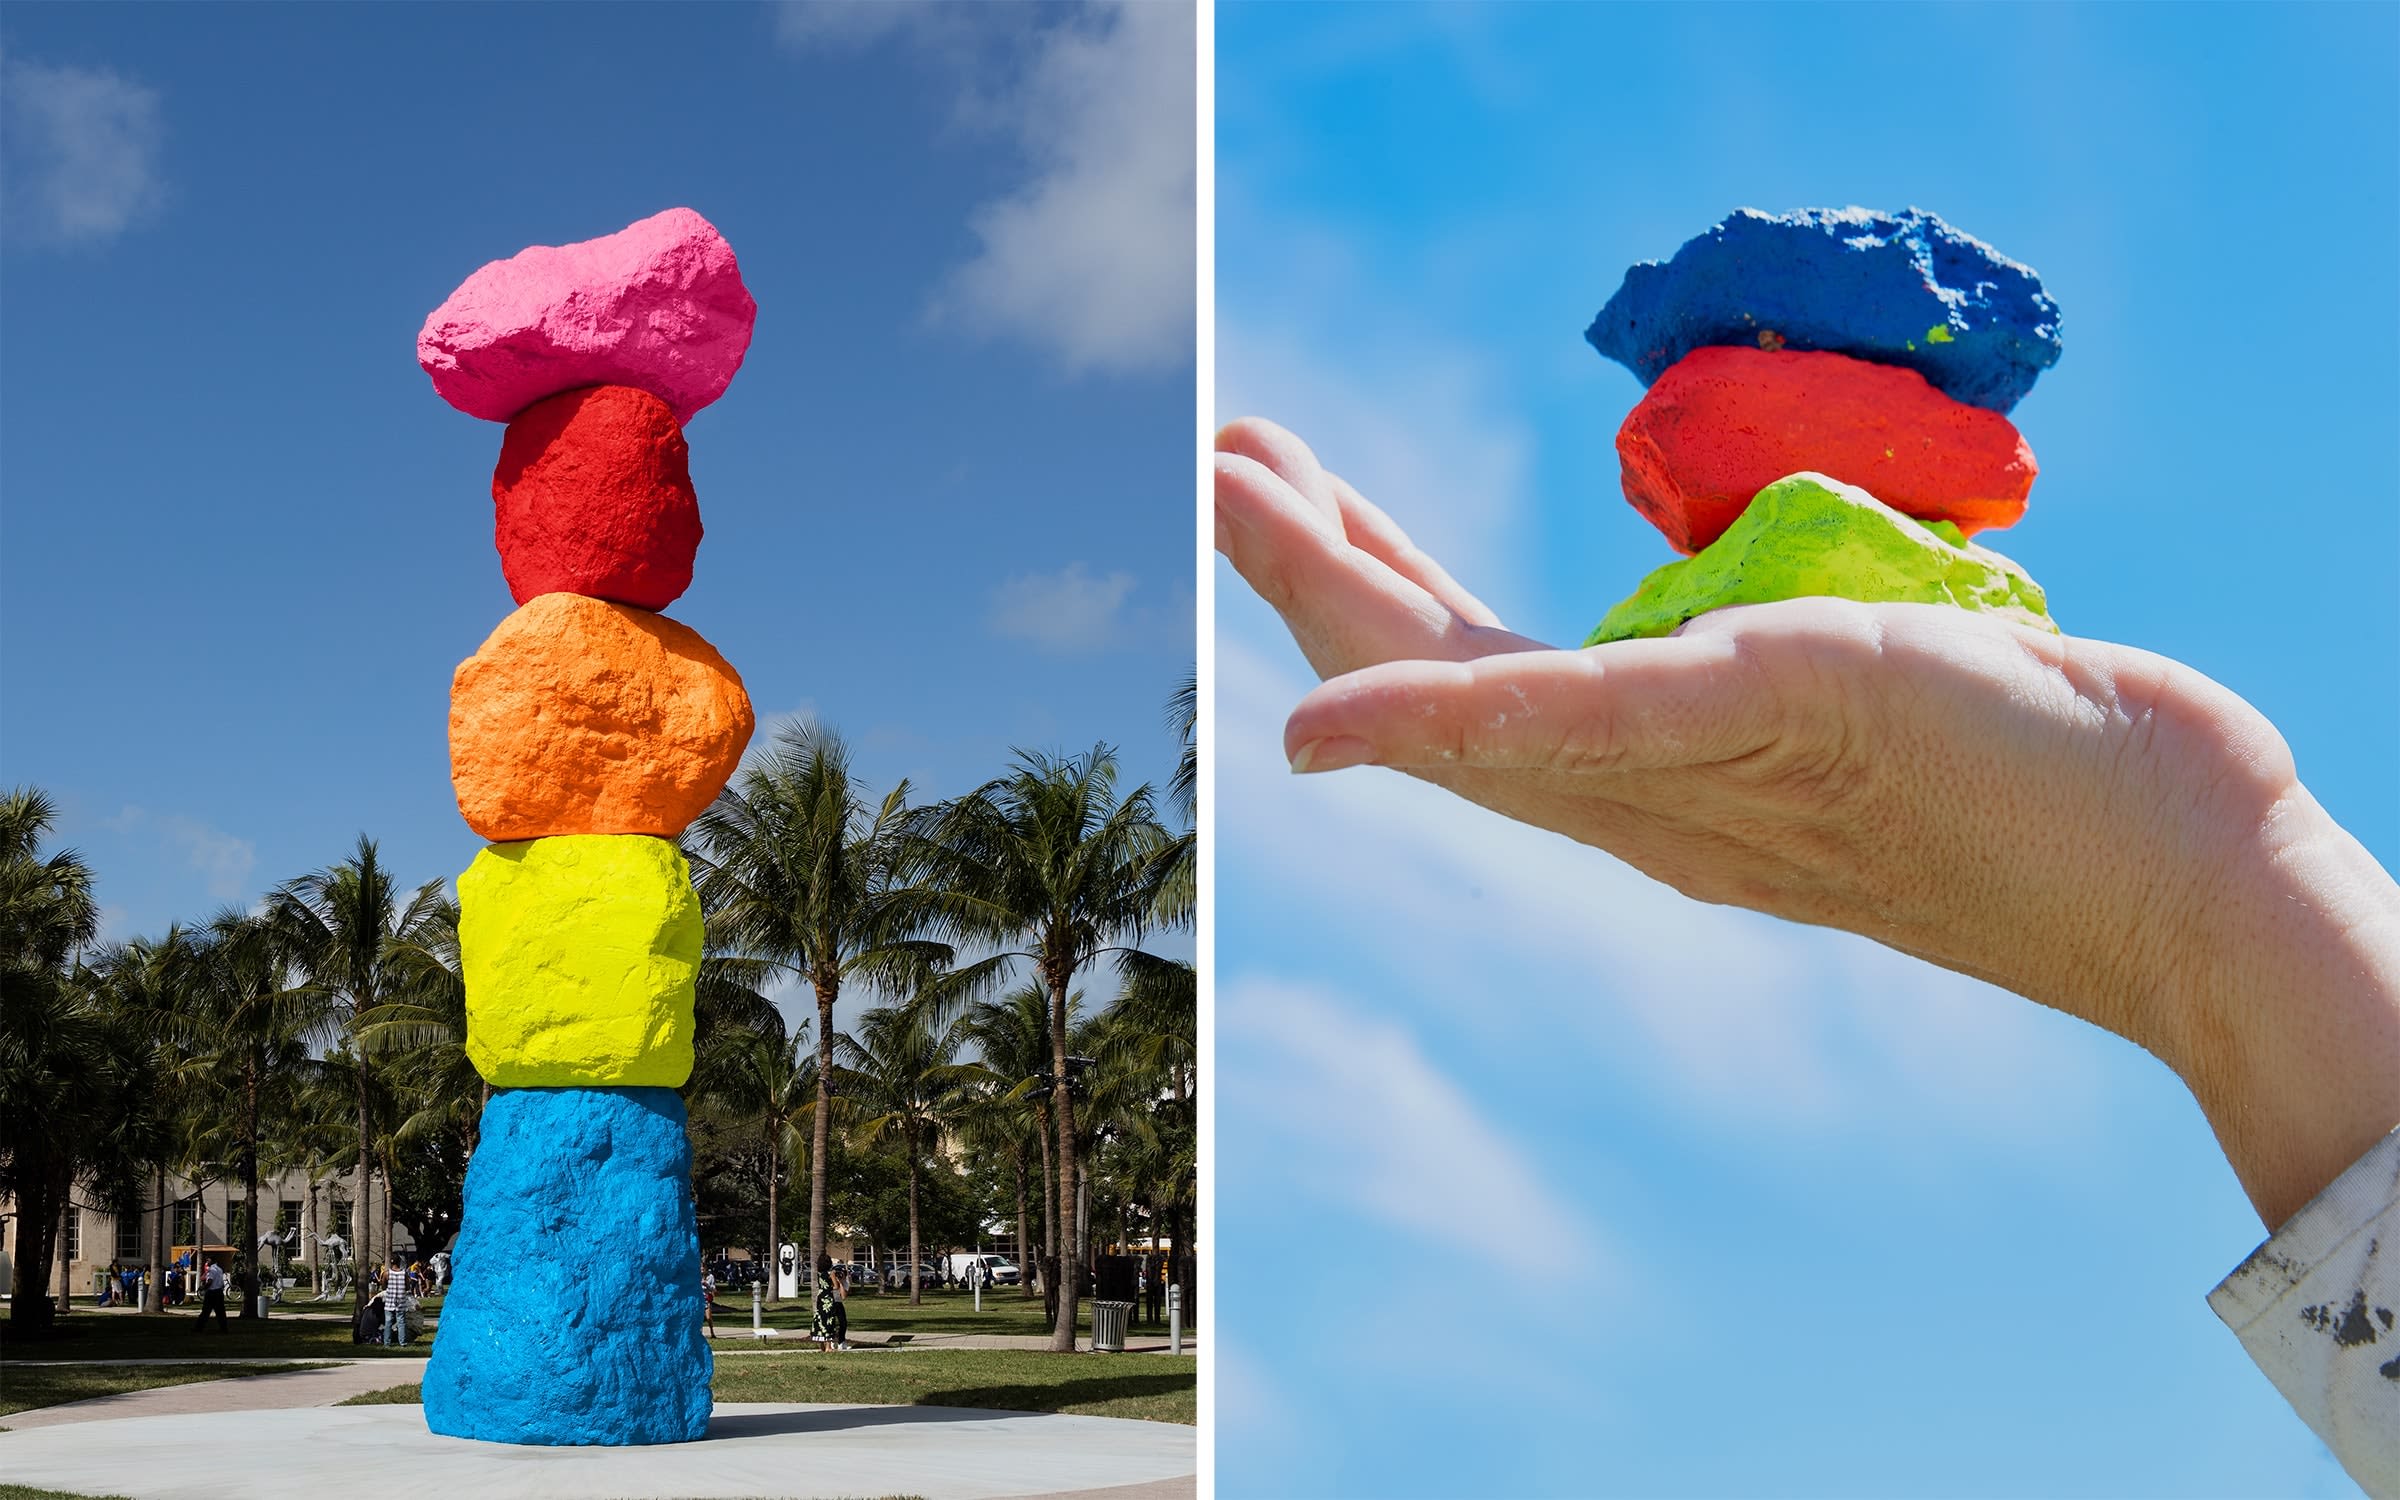 Left: Ugo Rondinone, Miami Mountain, 2016, painted stone and stainless steel, 3.5 × 12.5 × 3.5m. Photo by Andrea Rossetti, courtesy of Studio Rondinone. Right: Marcela Sinclair holding up a few stones from Derrame (Spill), 2019. Photo by Mani Gatto.